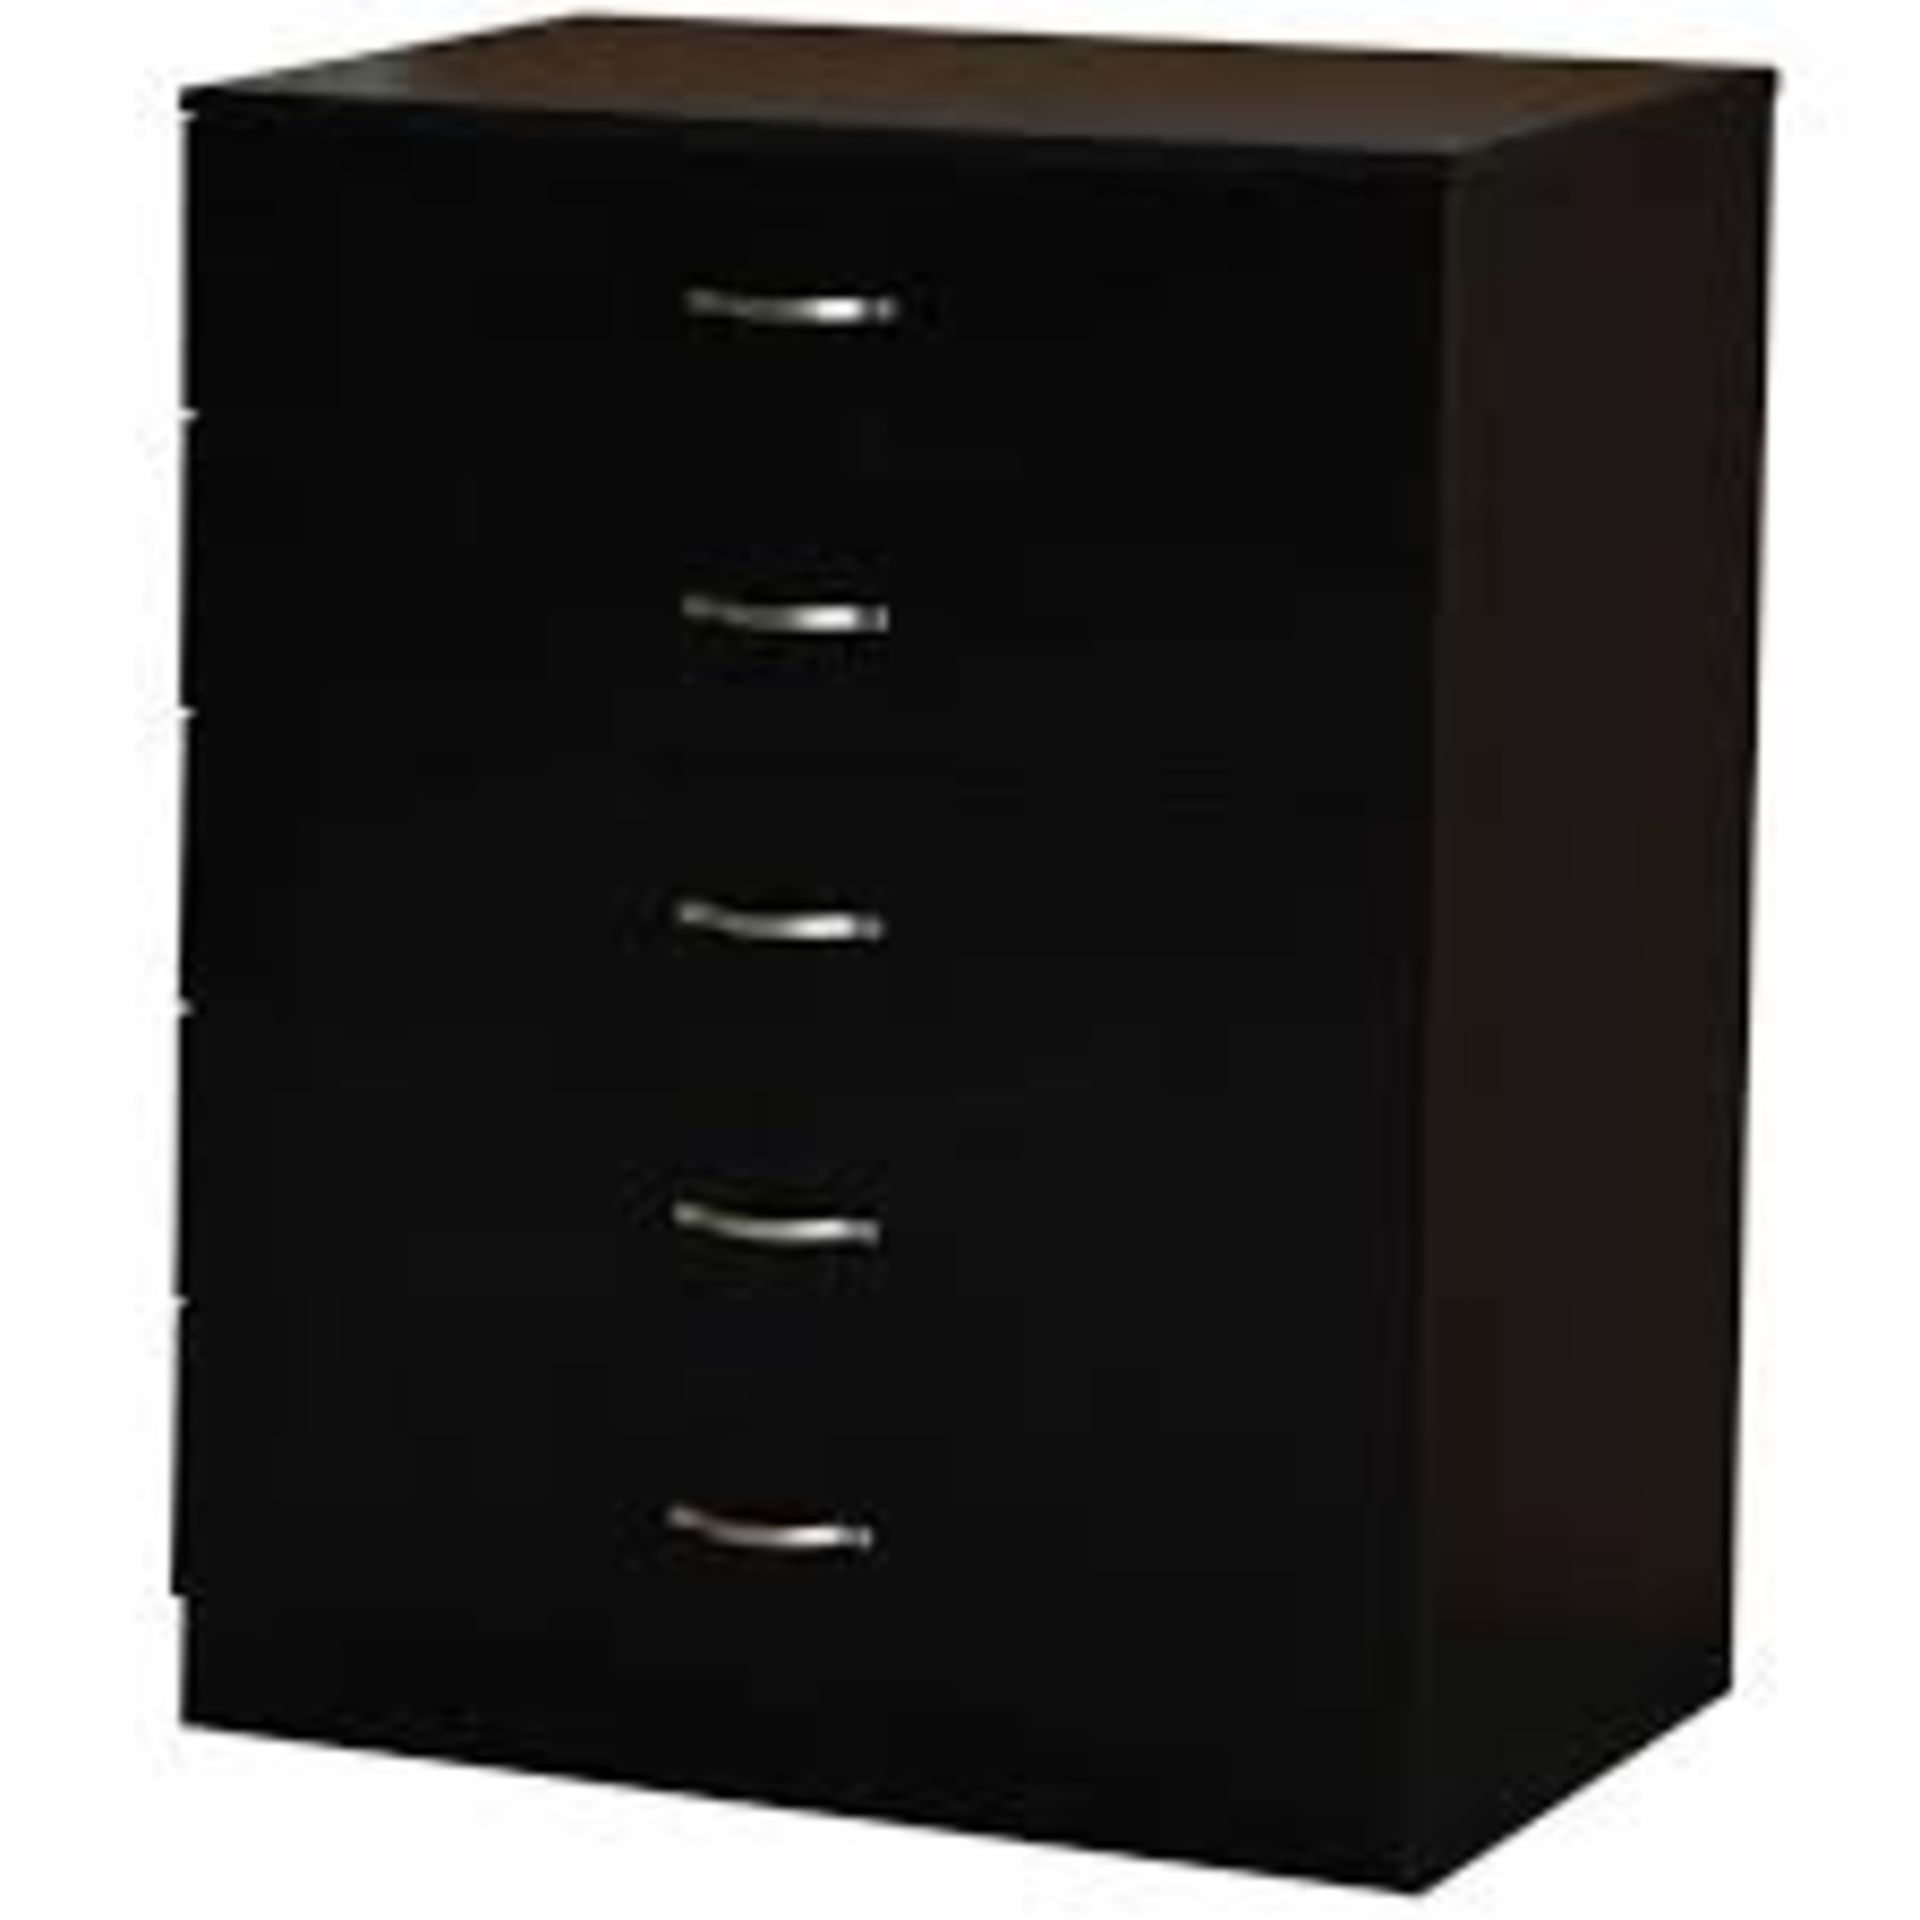 Boxed Vida Design 5 Drawer Chest of Drawers RRP £100 (14101) (Public Viewing and Appraisals